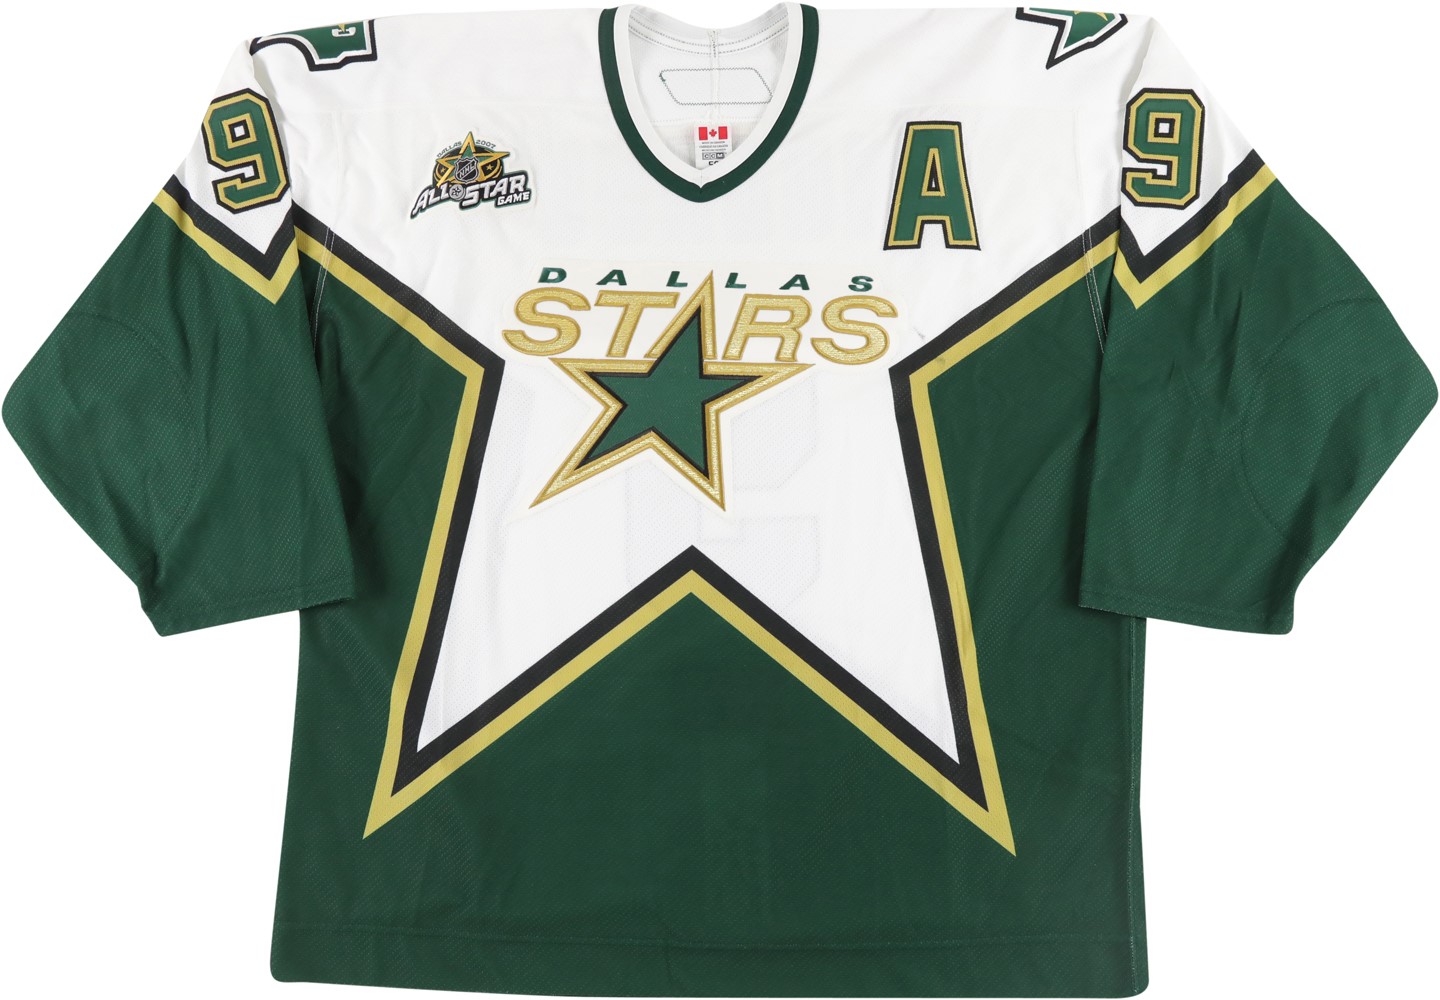 - 3/17/07 Mike Modano Record Breaking 502nd and 503rd Goal Game Worn Jersey - Passes Joe Mullen for Most Goals by American Born Player (MeiGray & Photo-Matched)